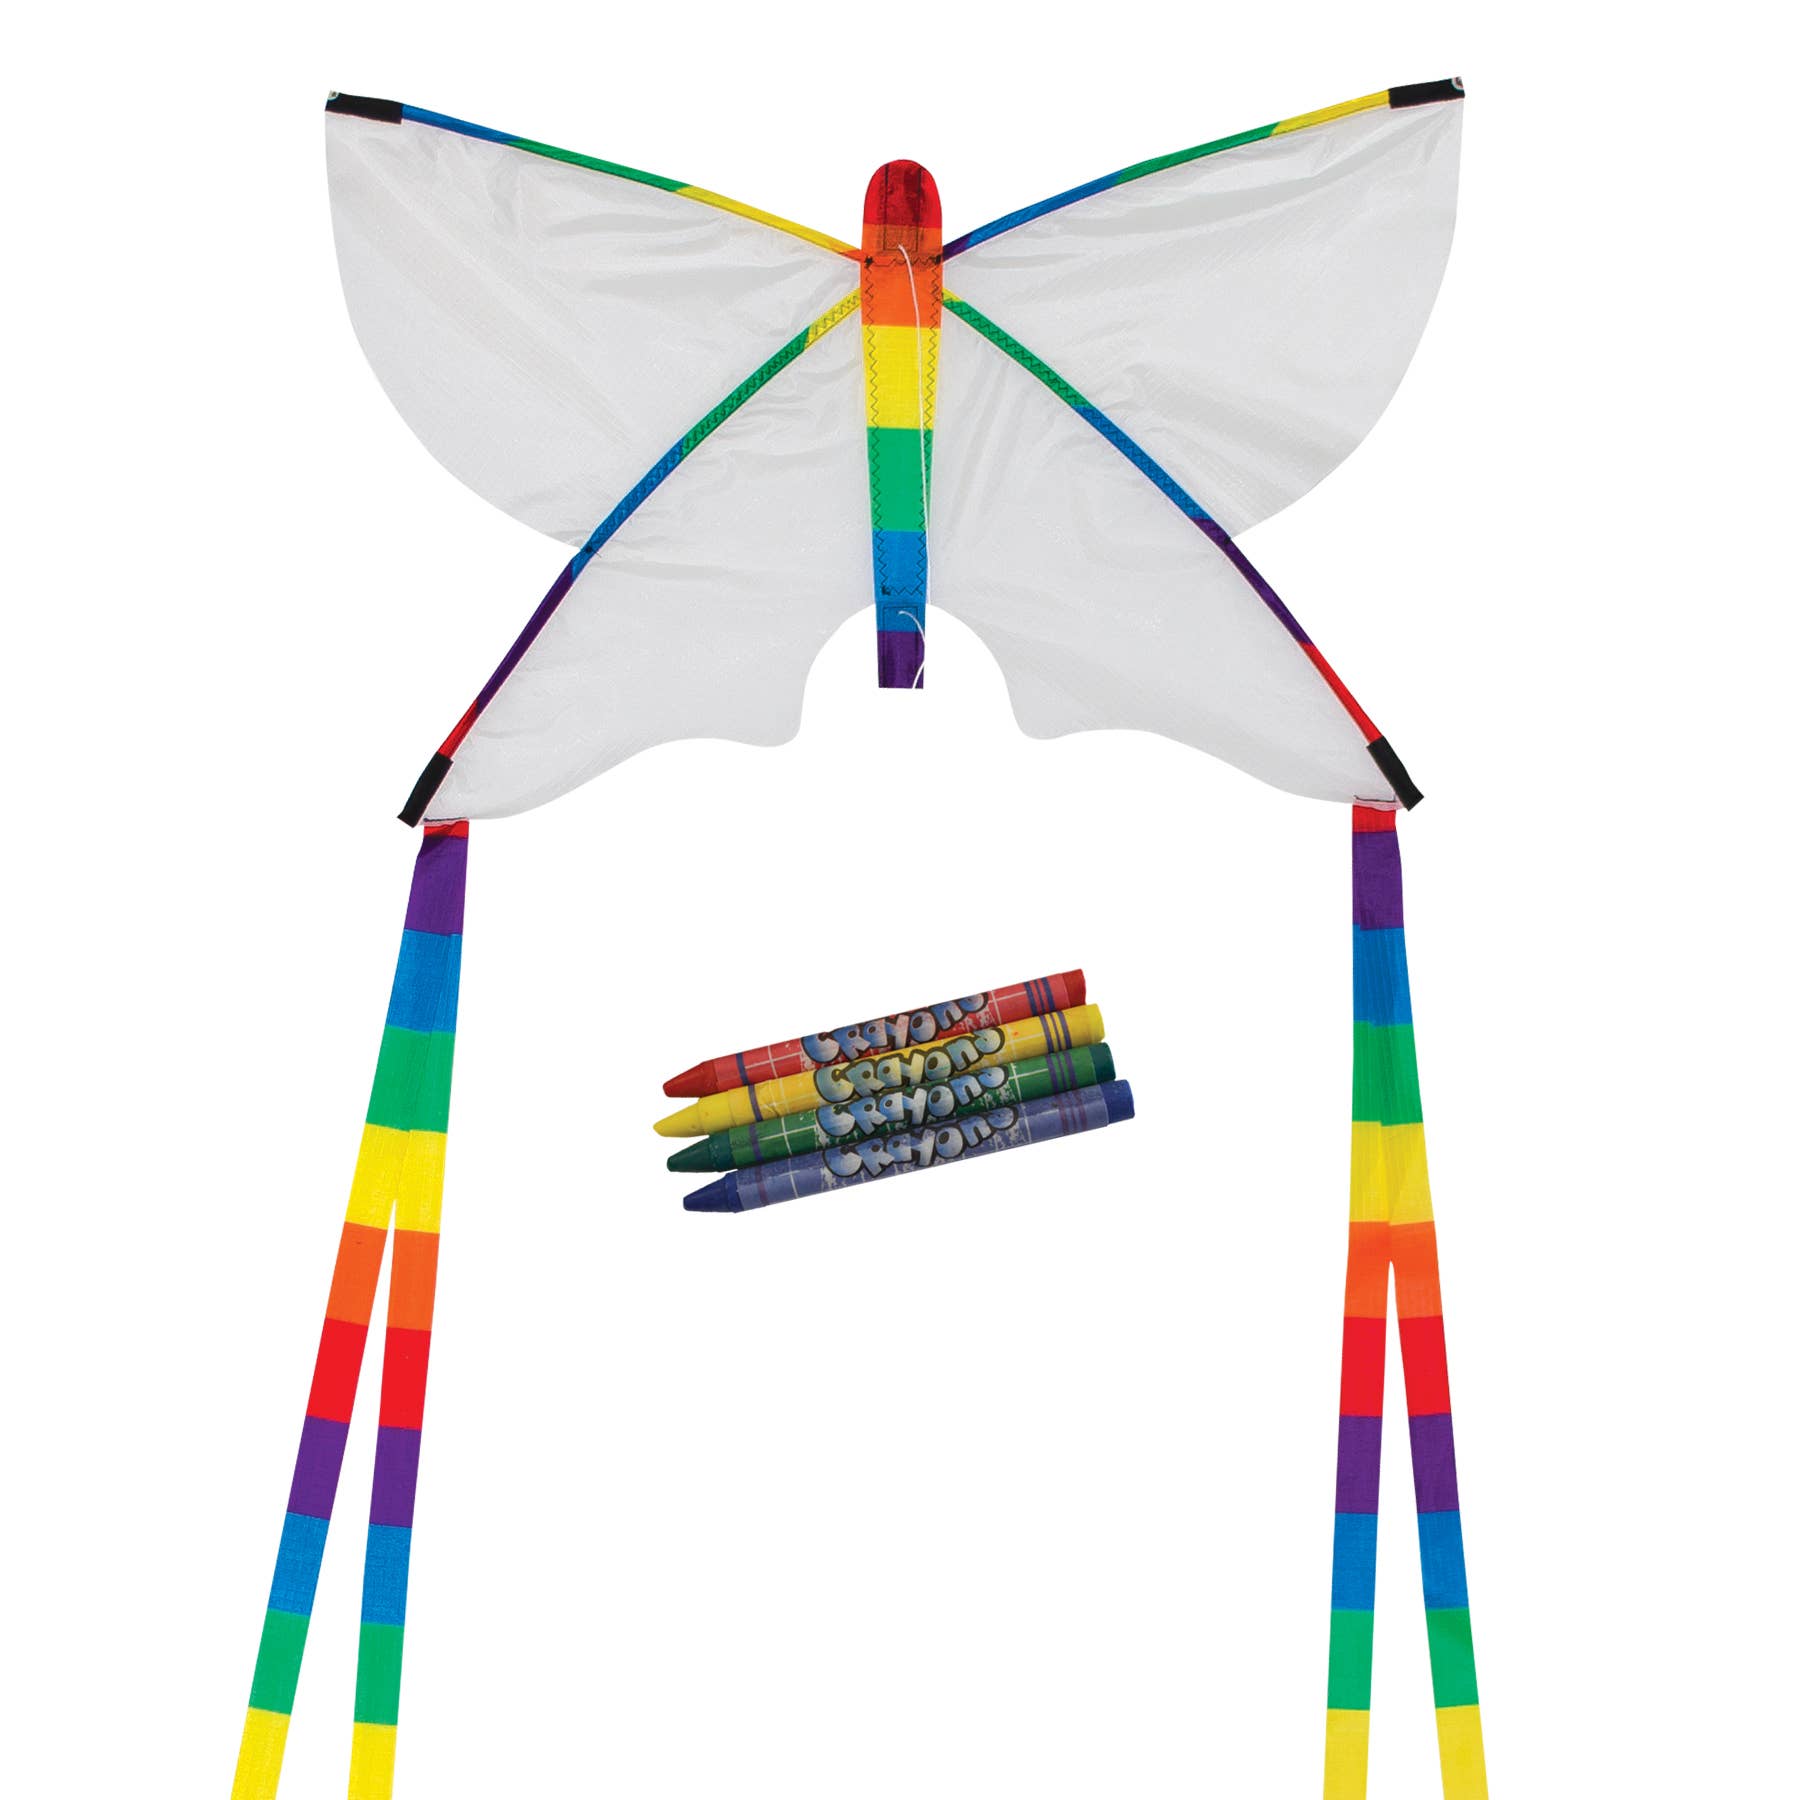 Front view of the butterfly coloring kite against a white background.